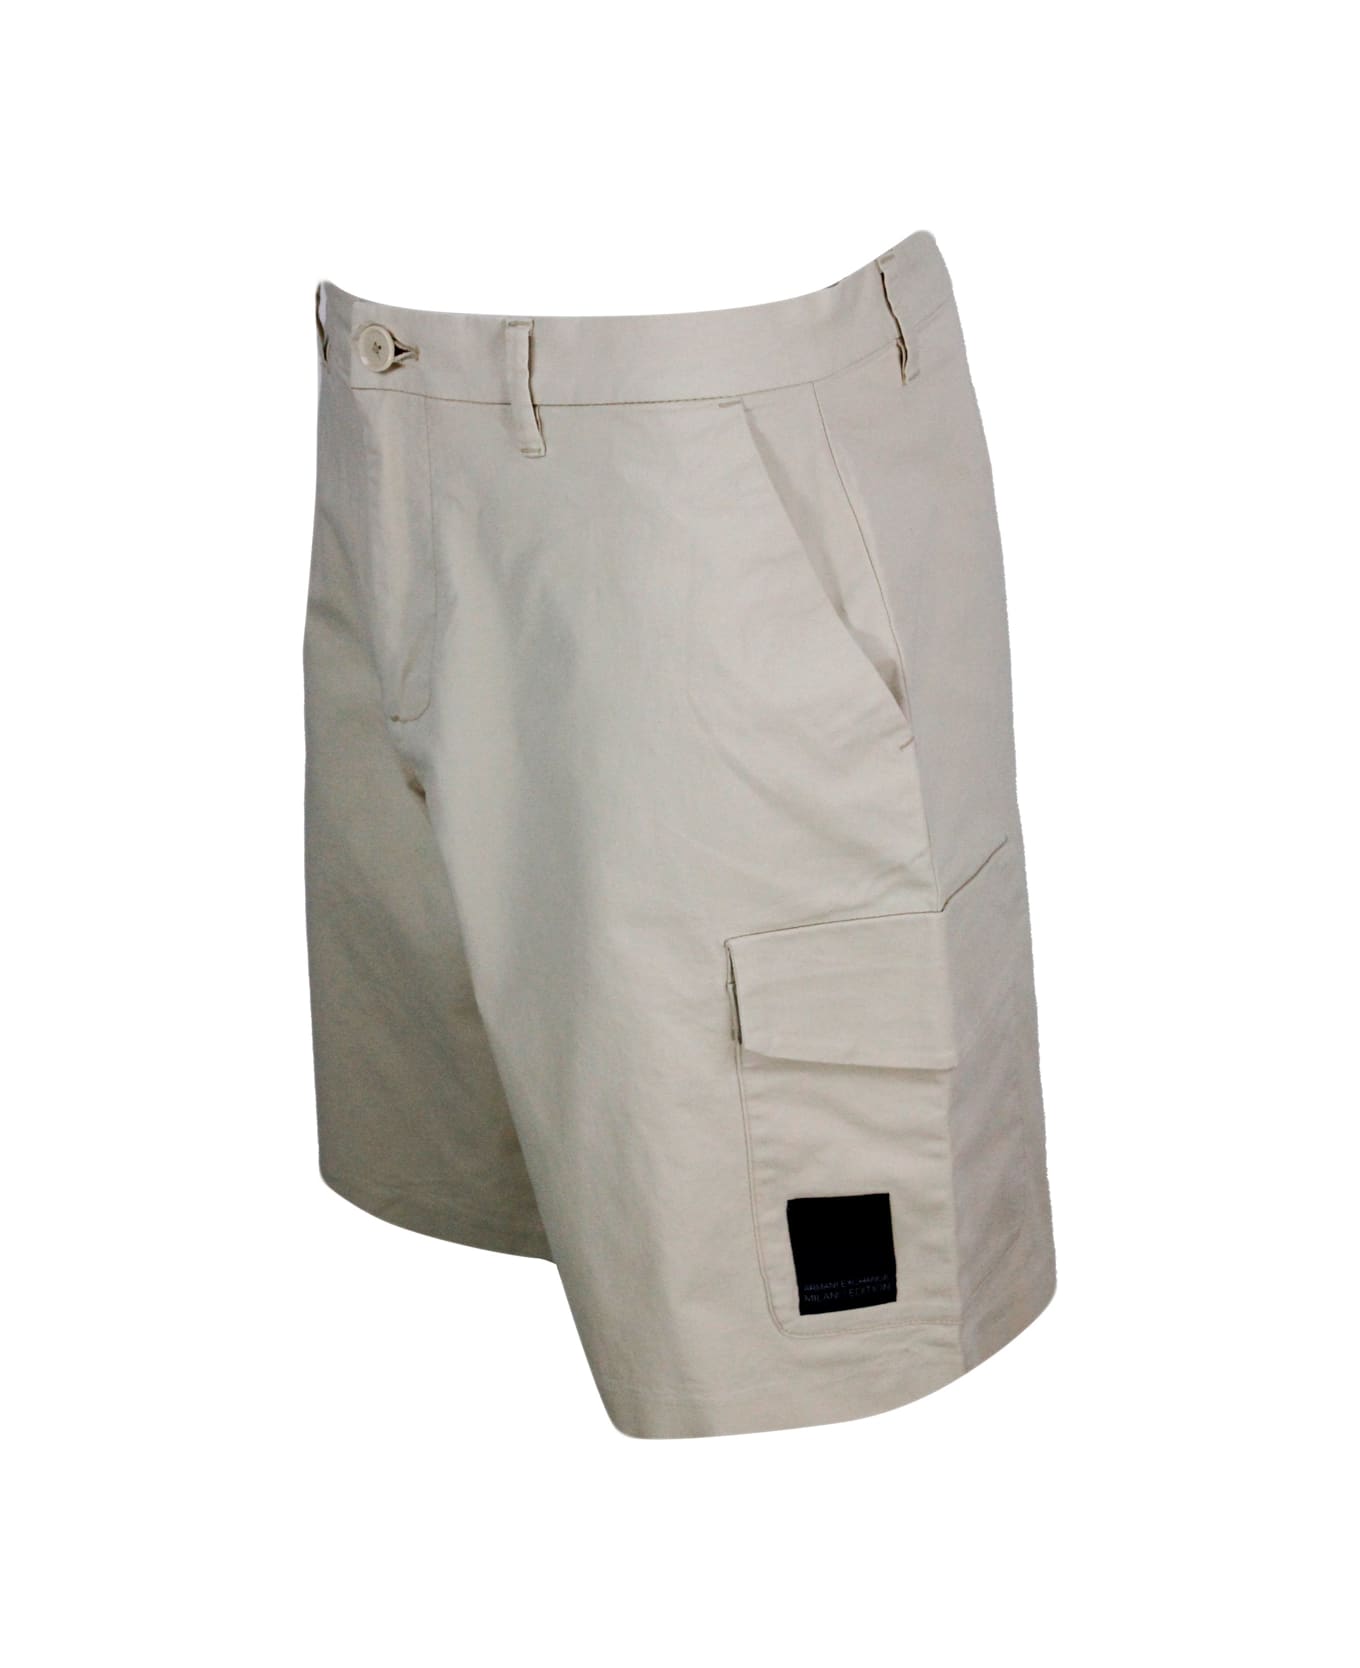 Armani Collezioni Stretch Cotton Bermuda Shorts, Cargo Model With Large Pockets On The Leg And Zip And Button Closure - Beige